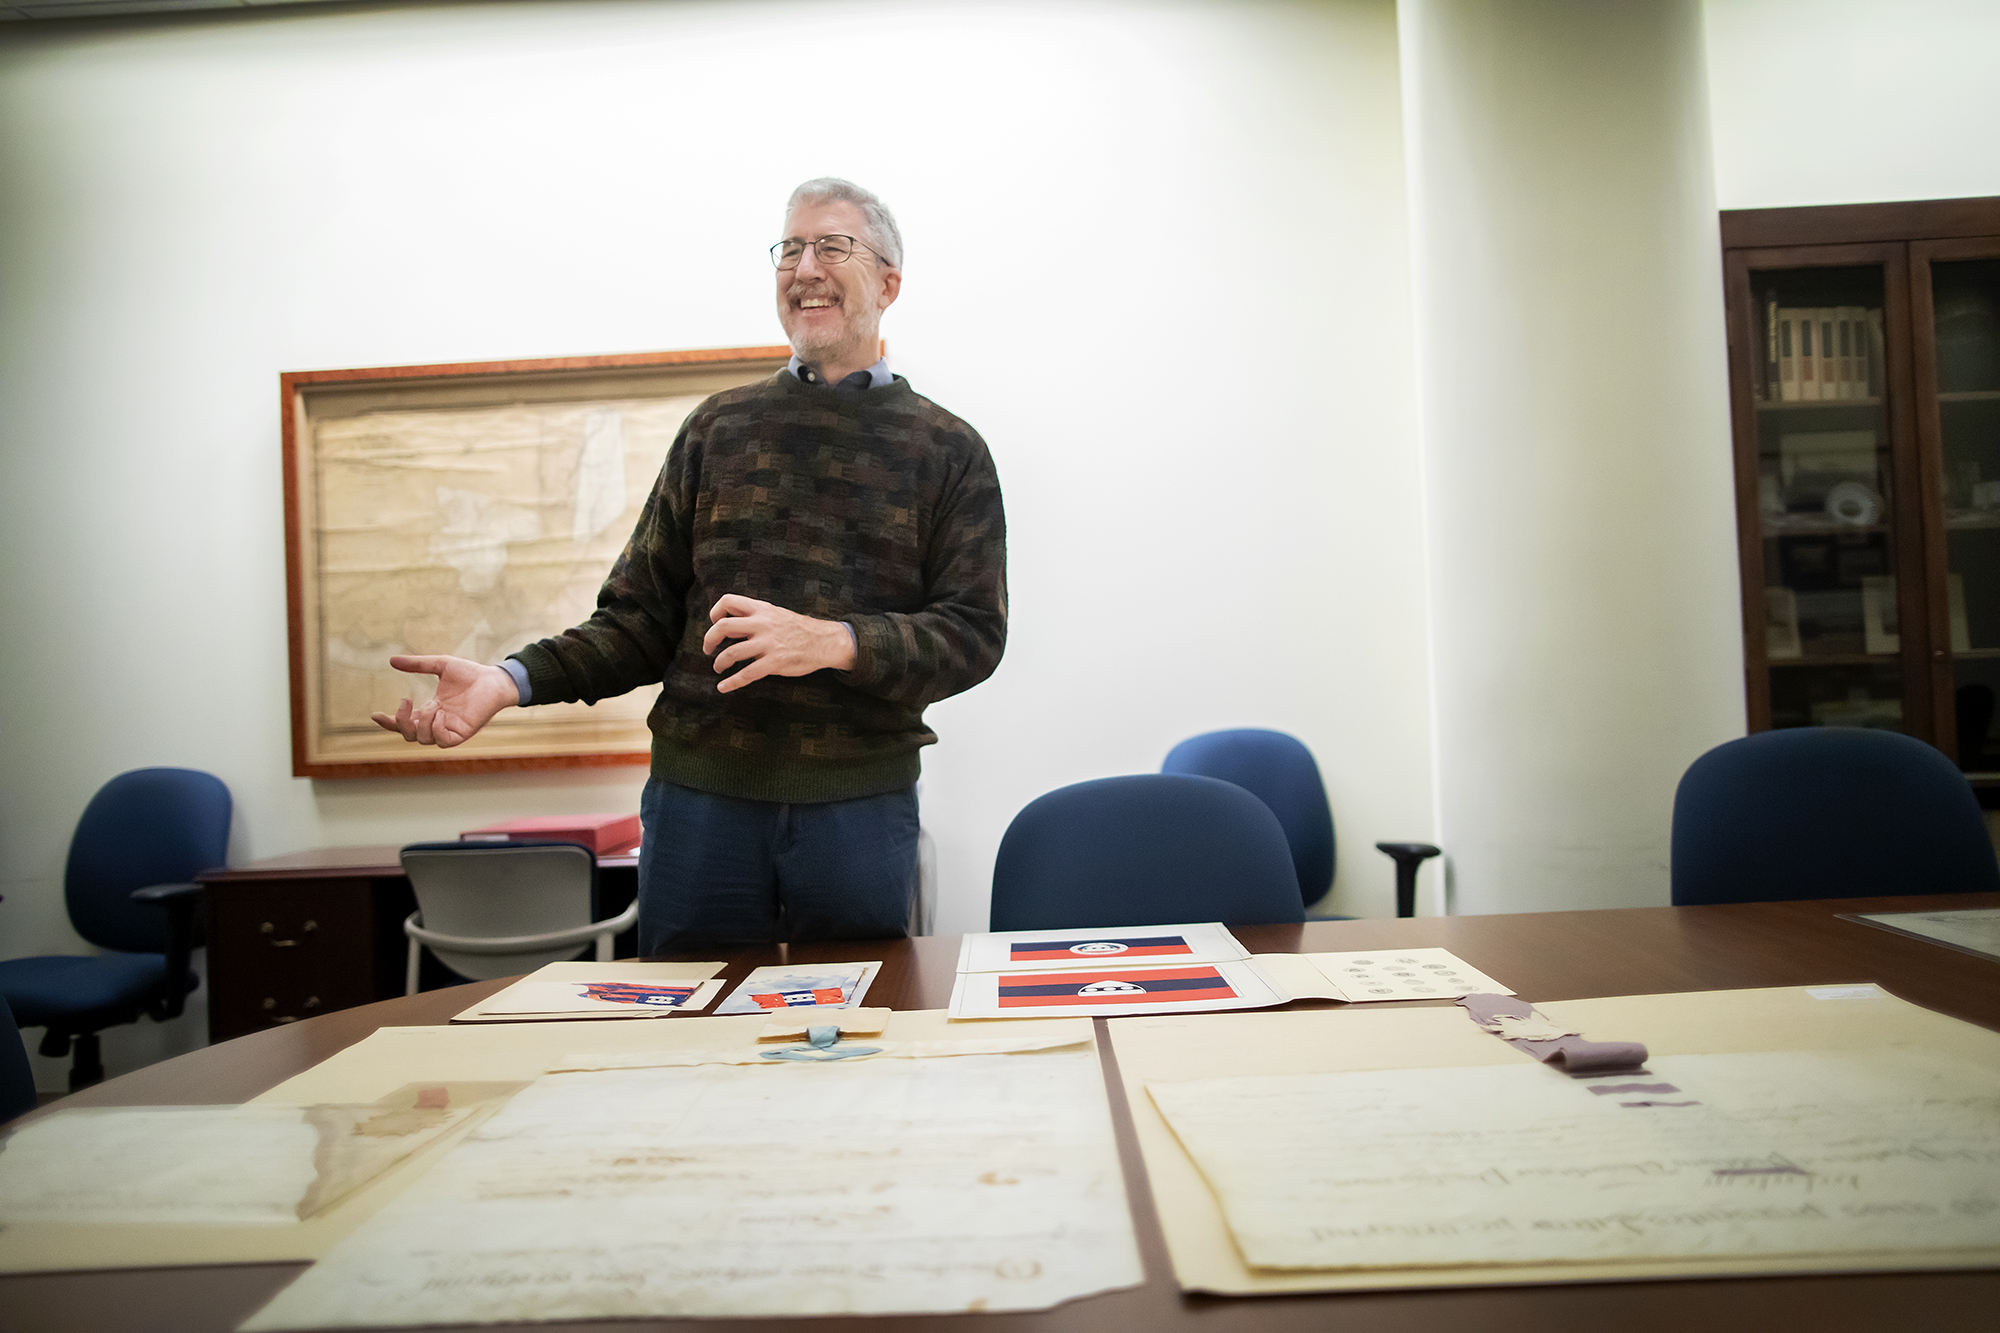 Archives curator stands over a table with ephemera from historical Penn inaugurations.